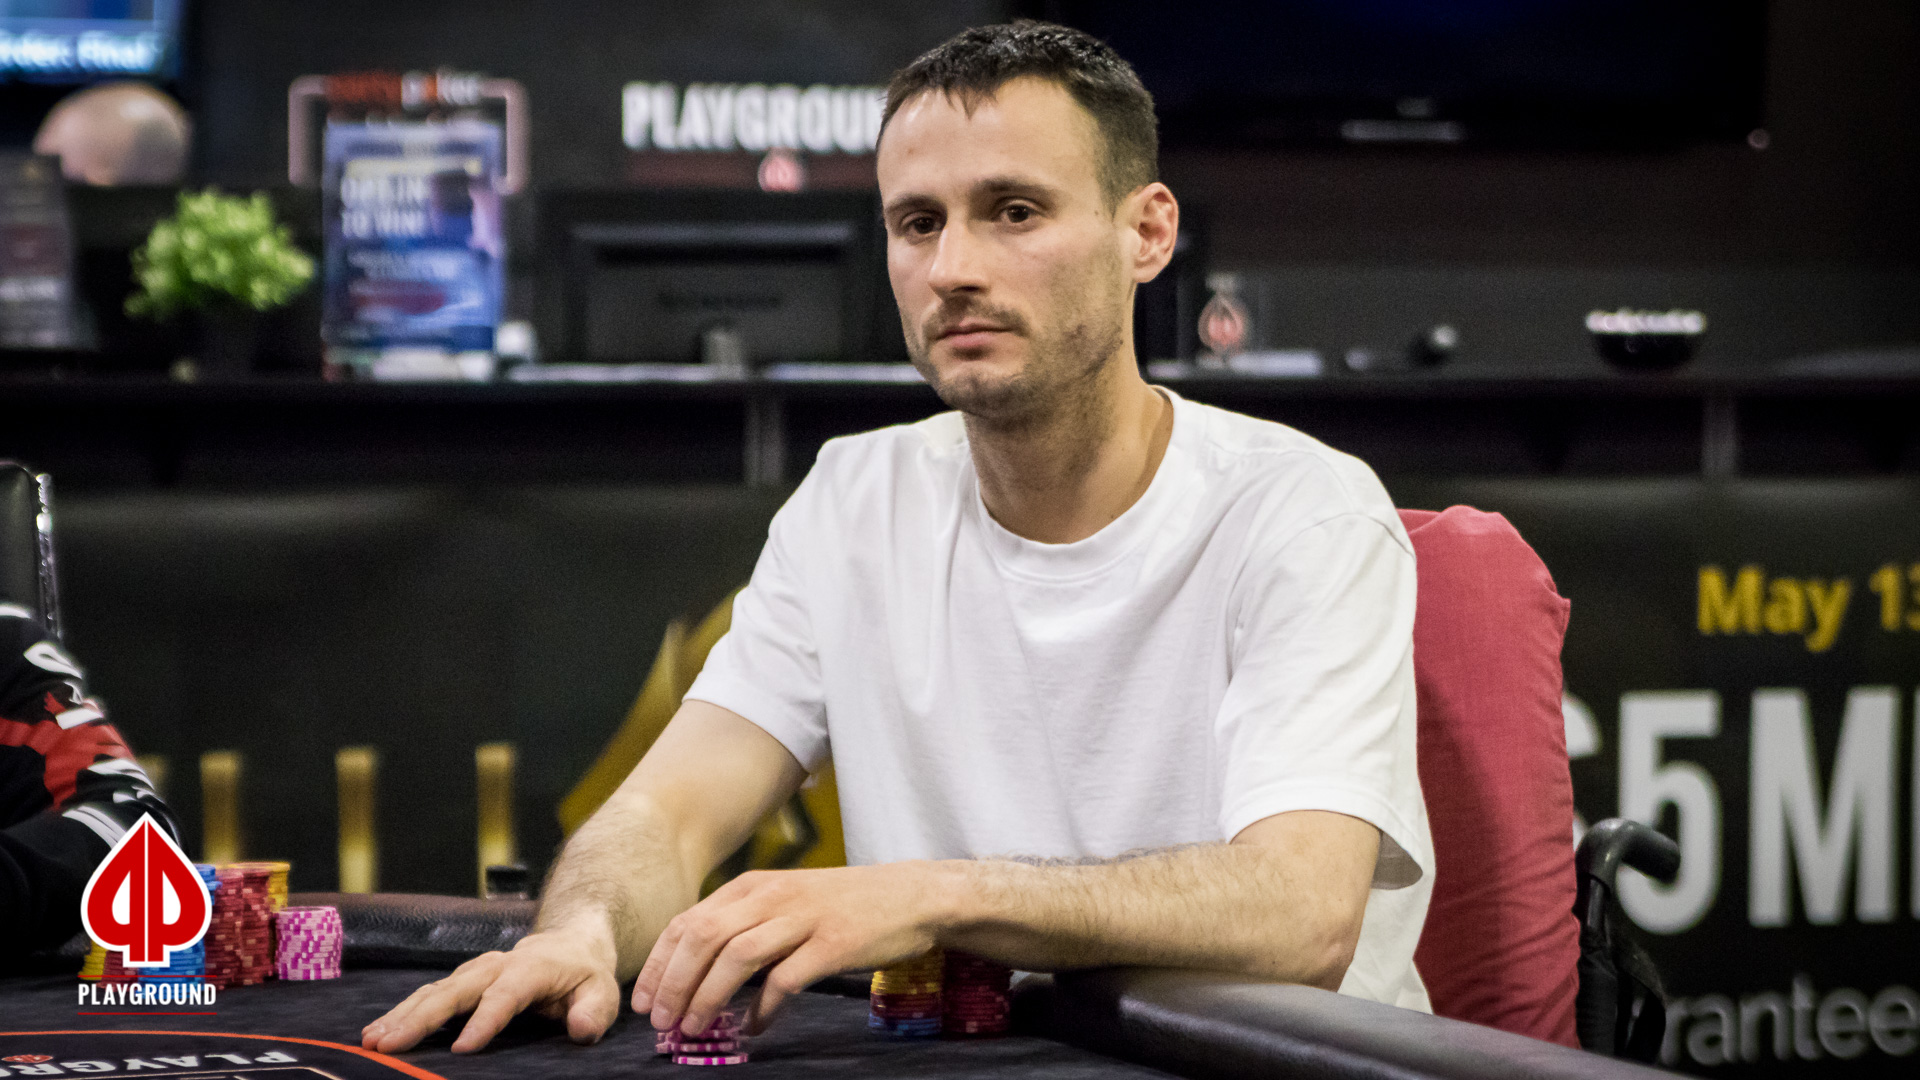 Third place for Jeanneau-Cyr: Heads up action!